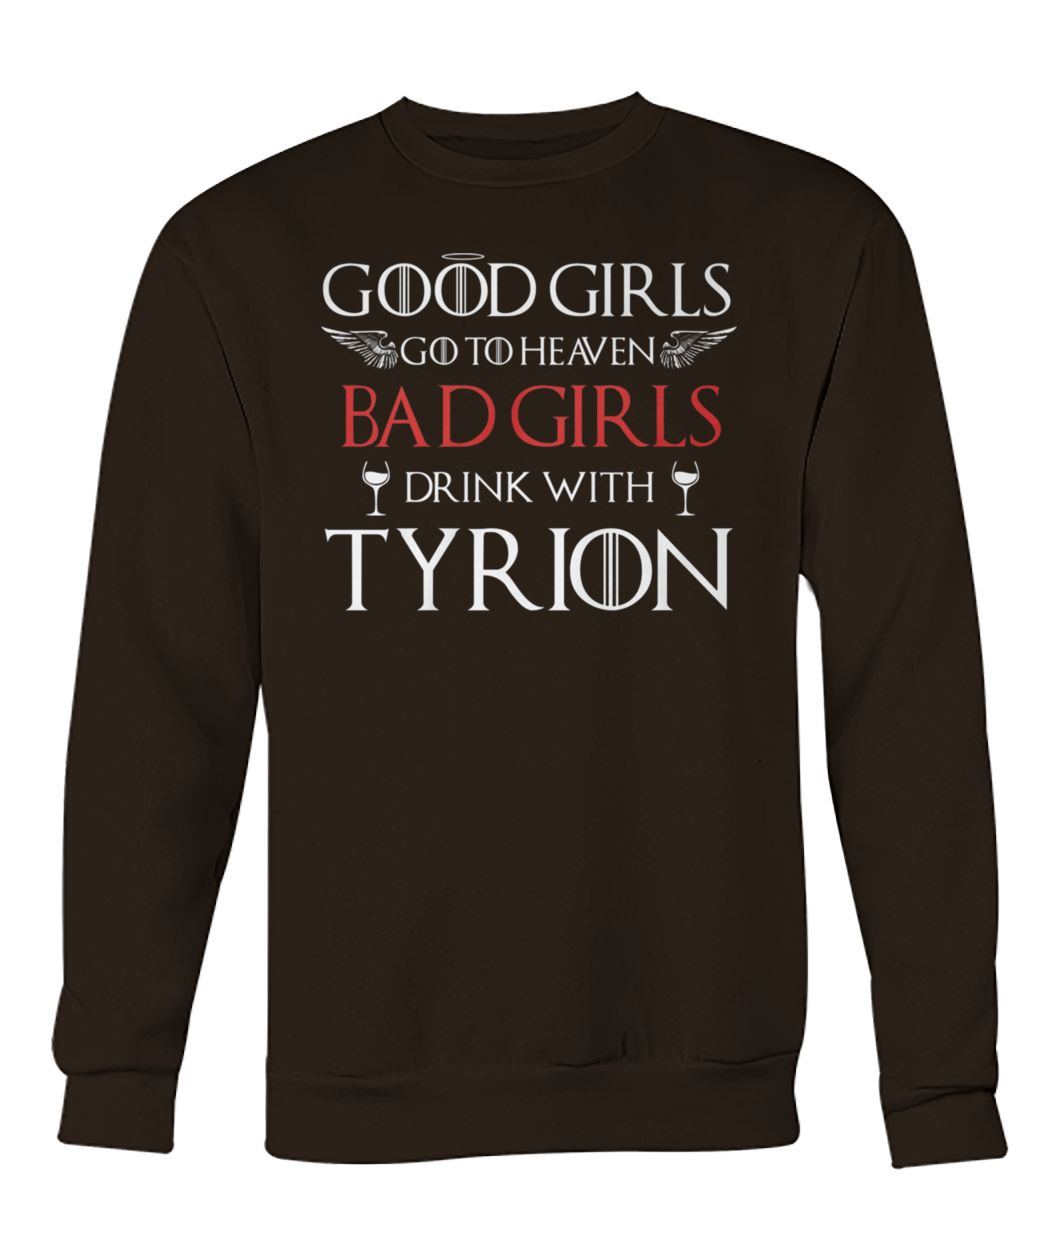 Game of thrones good girls go to the heaven bad girls drink with tyrion crew neck sweatshirt